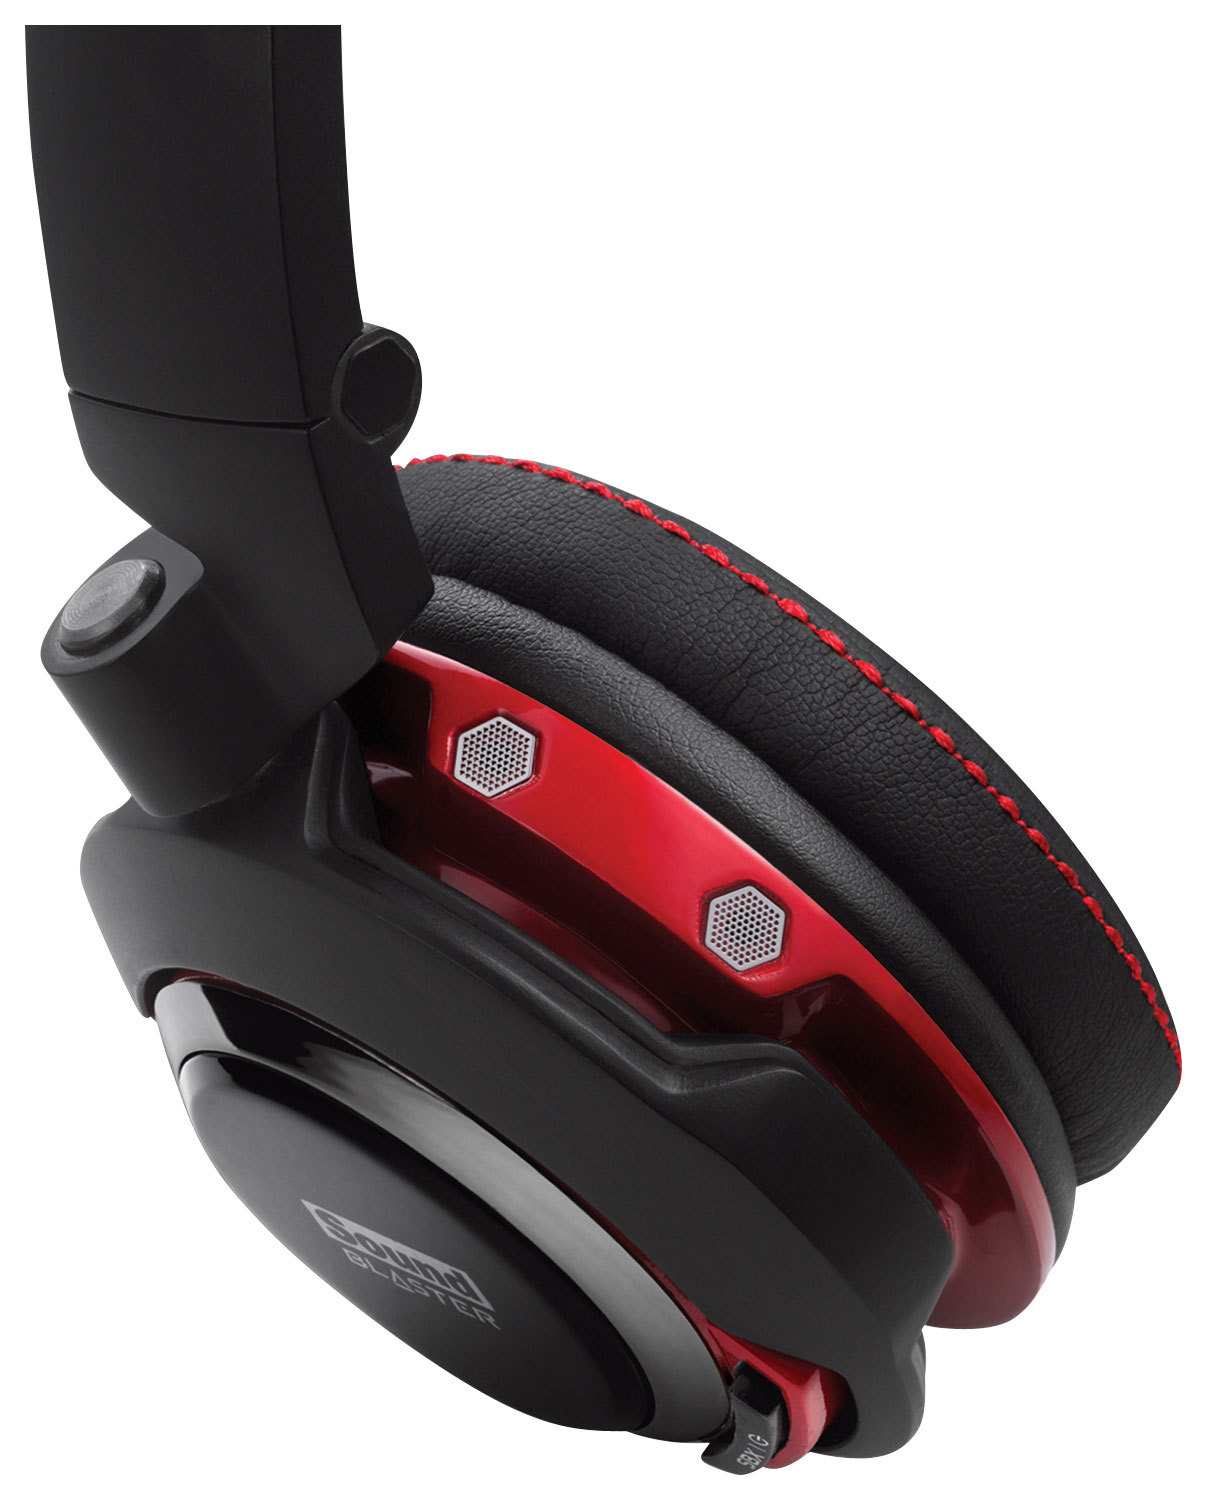 Best Buy: Creative Labs Sound Blaster Evo Zx Over-the-Ear